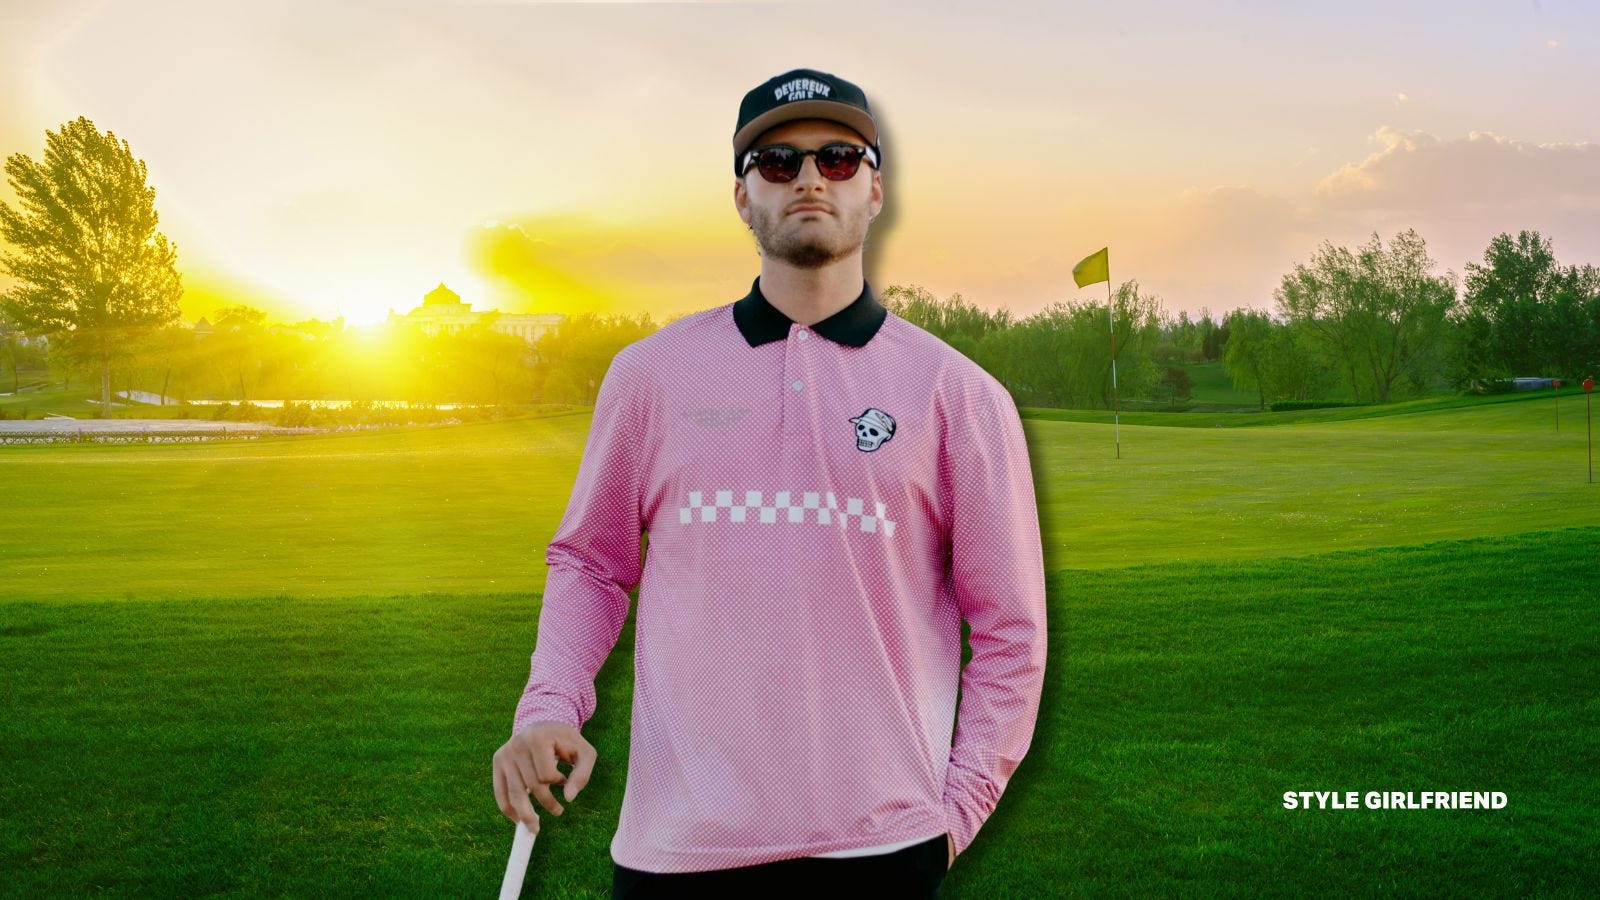 man in sunglasses and hat wearing a long-sleeve pink polo shirt on a golf course